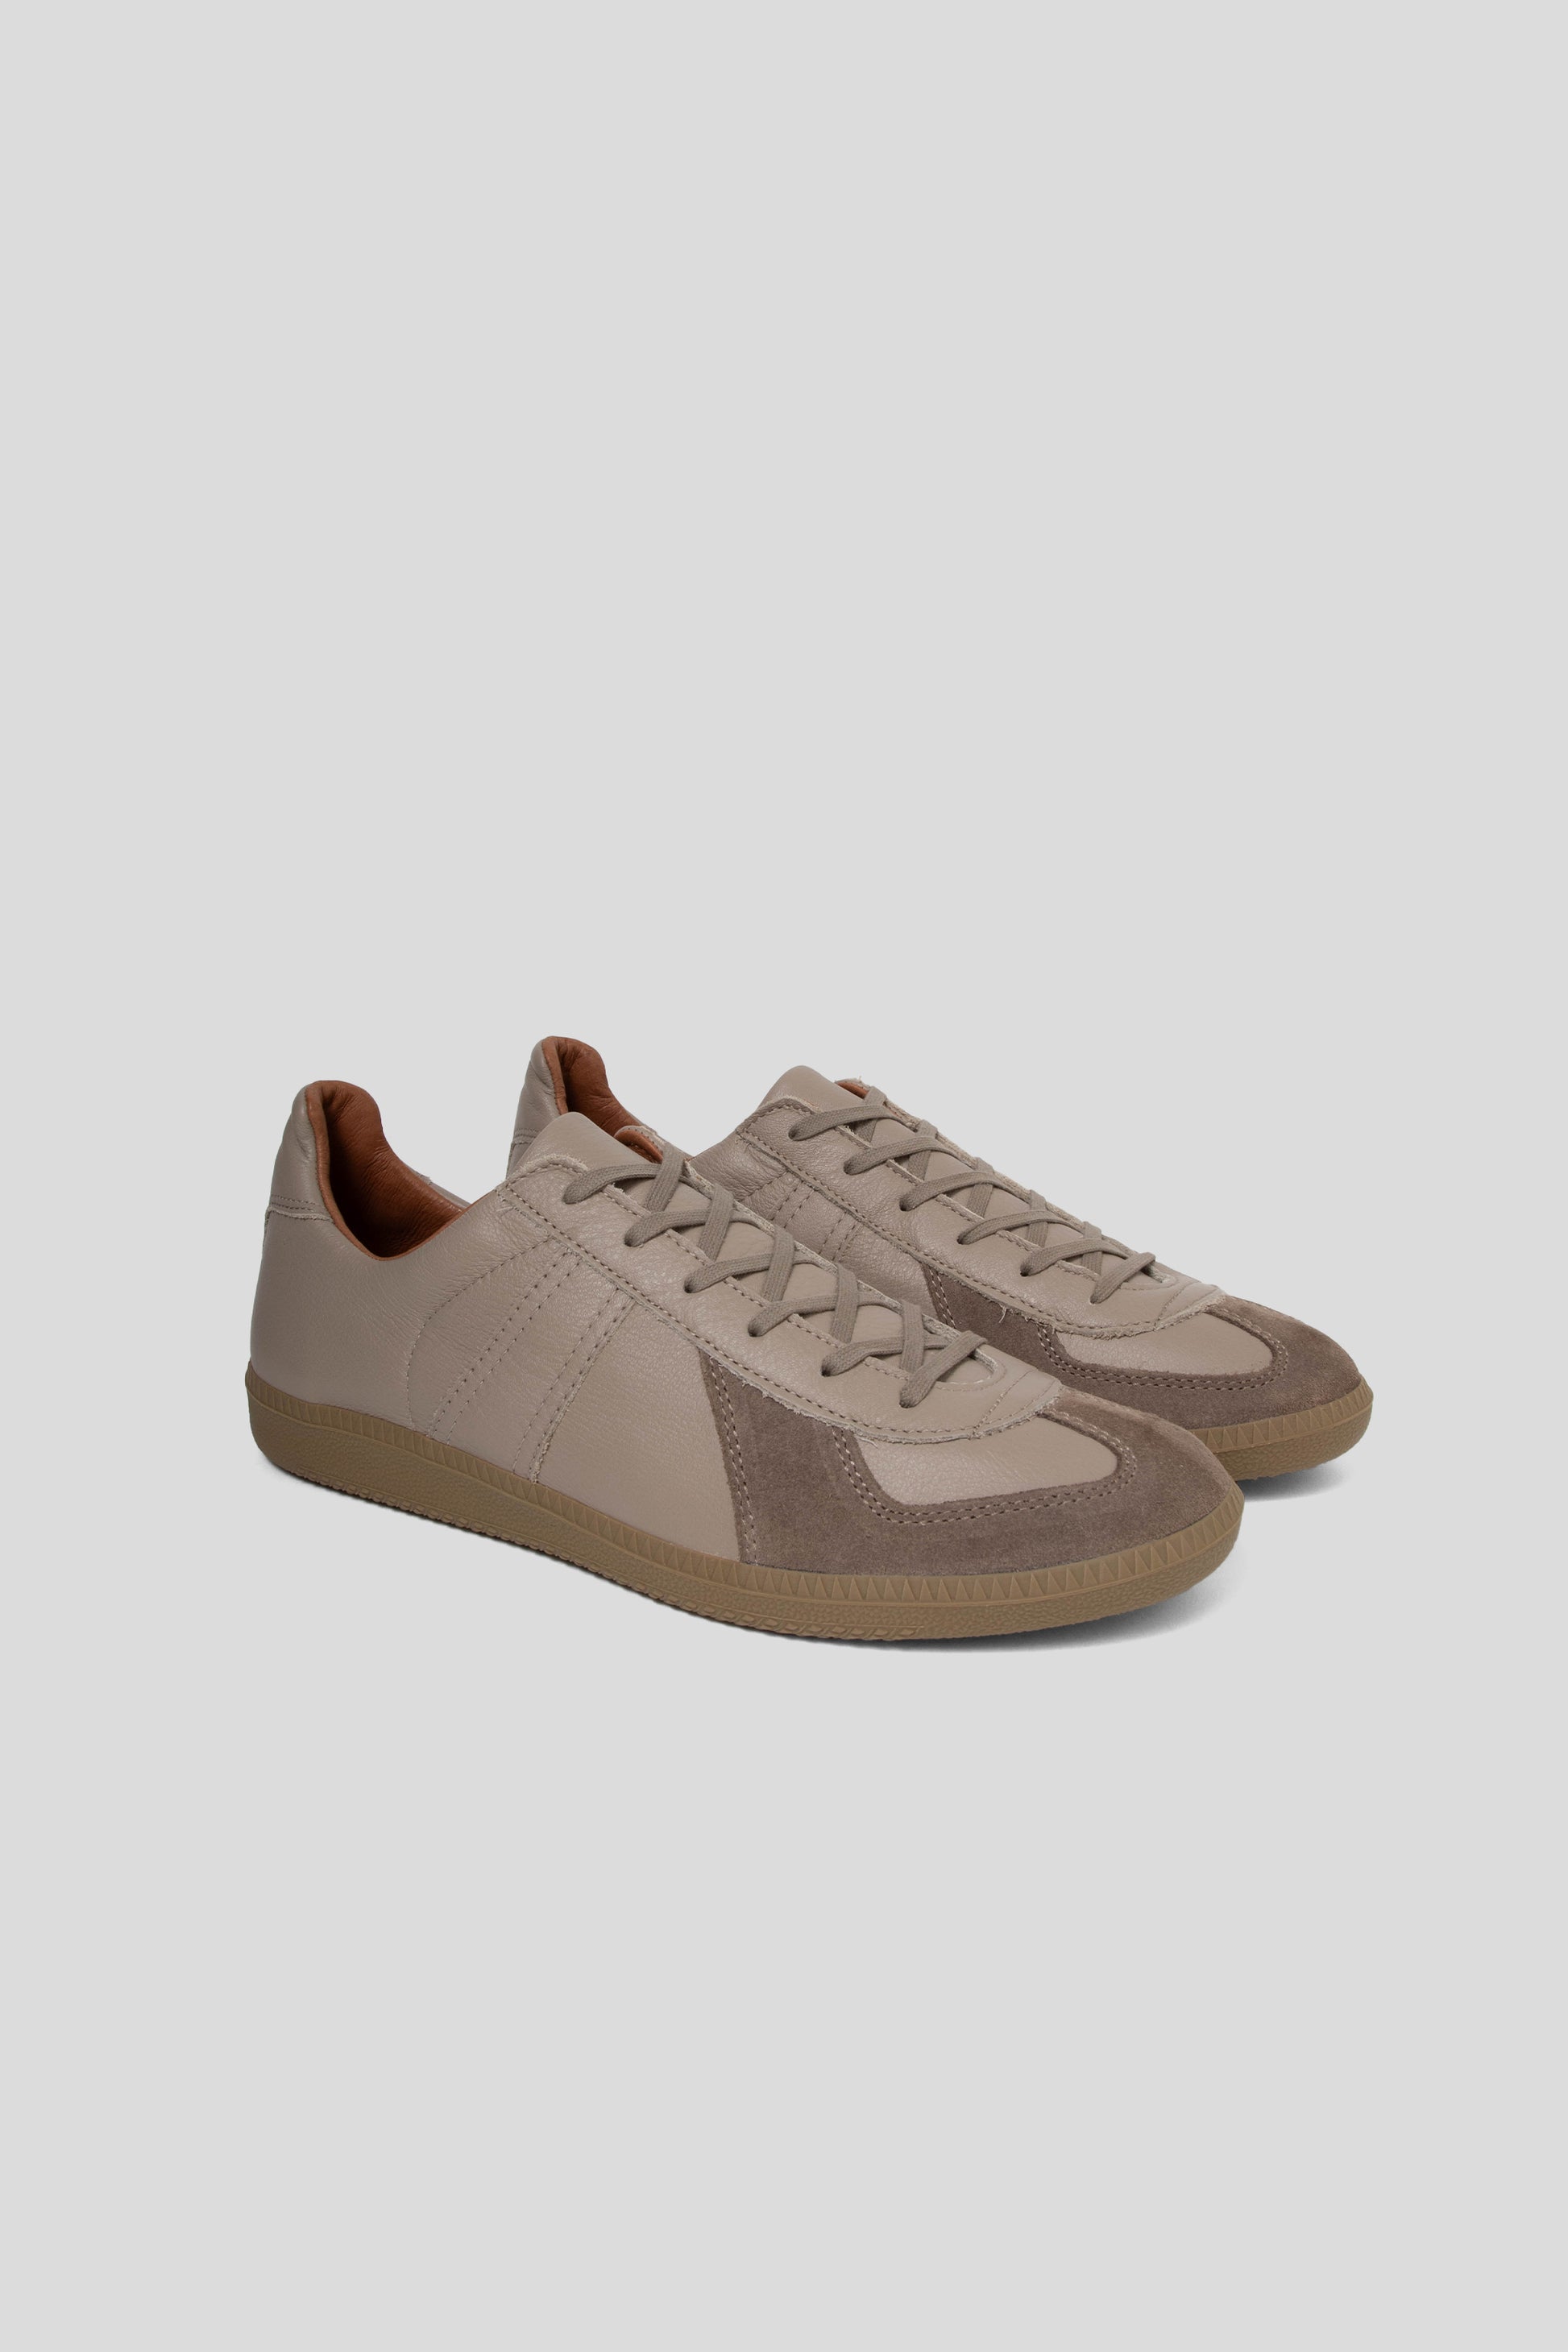 Reproduction of Found German Military Trainer - Beige Khaki